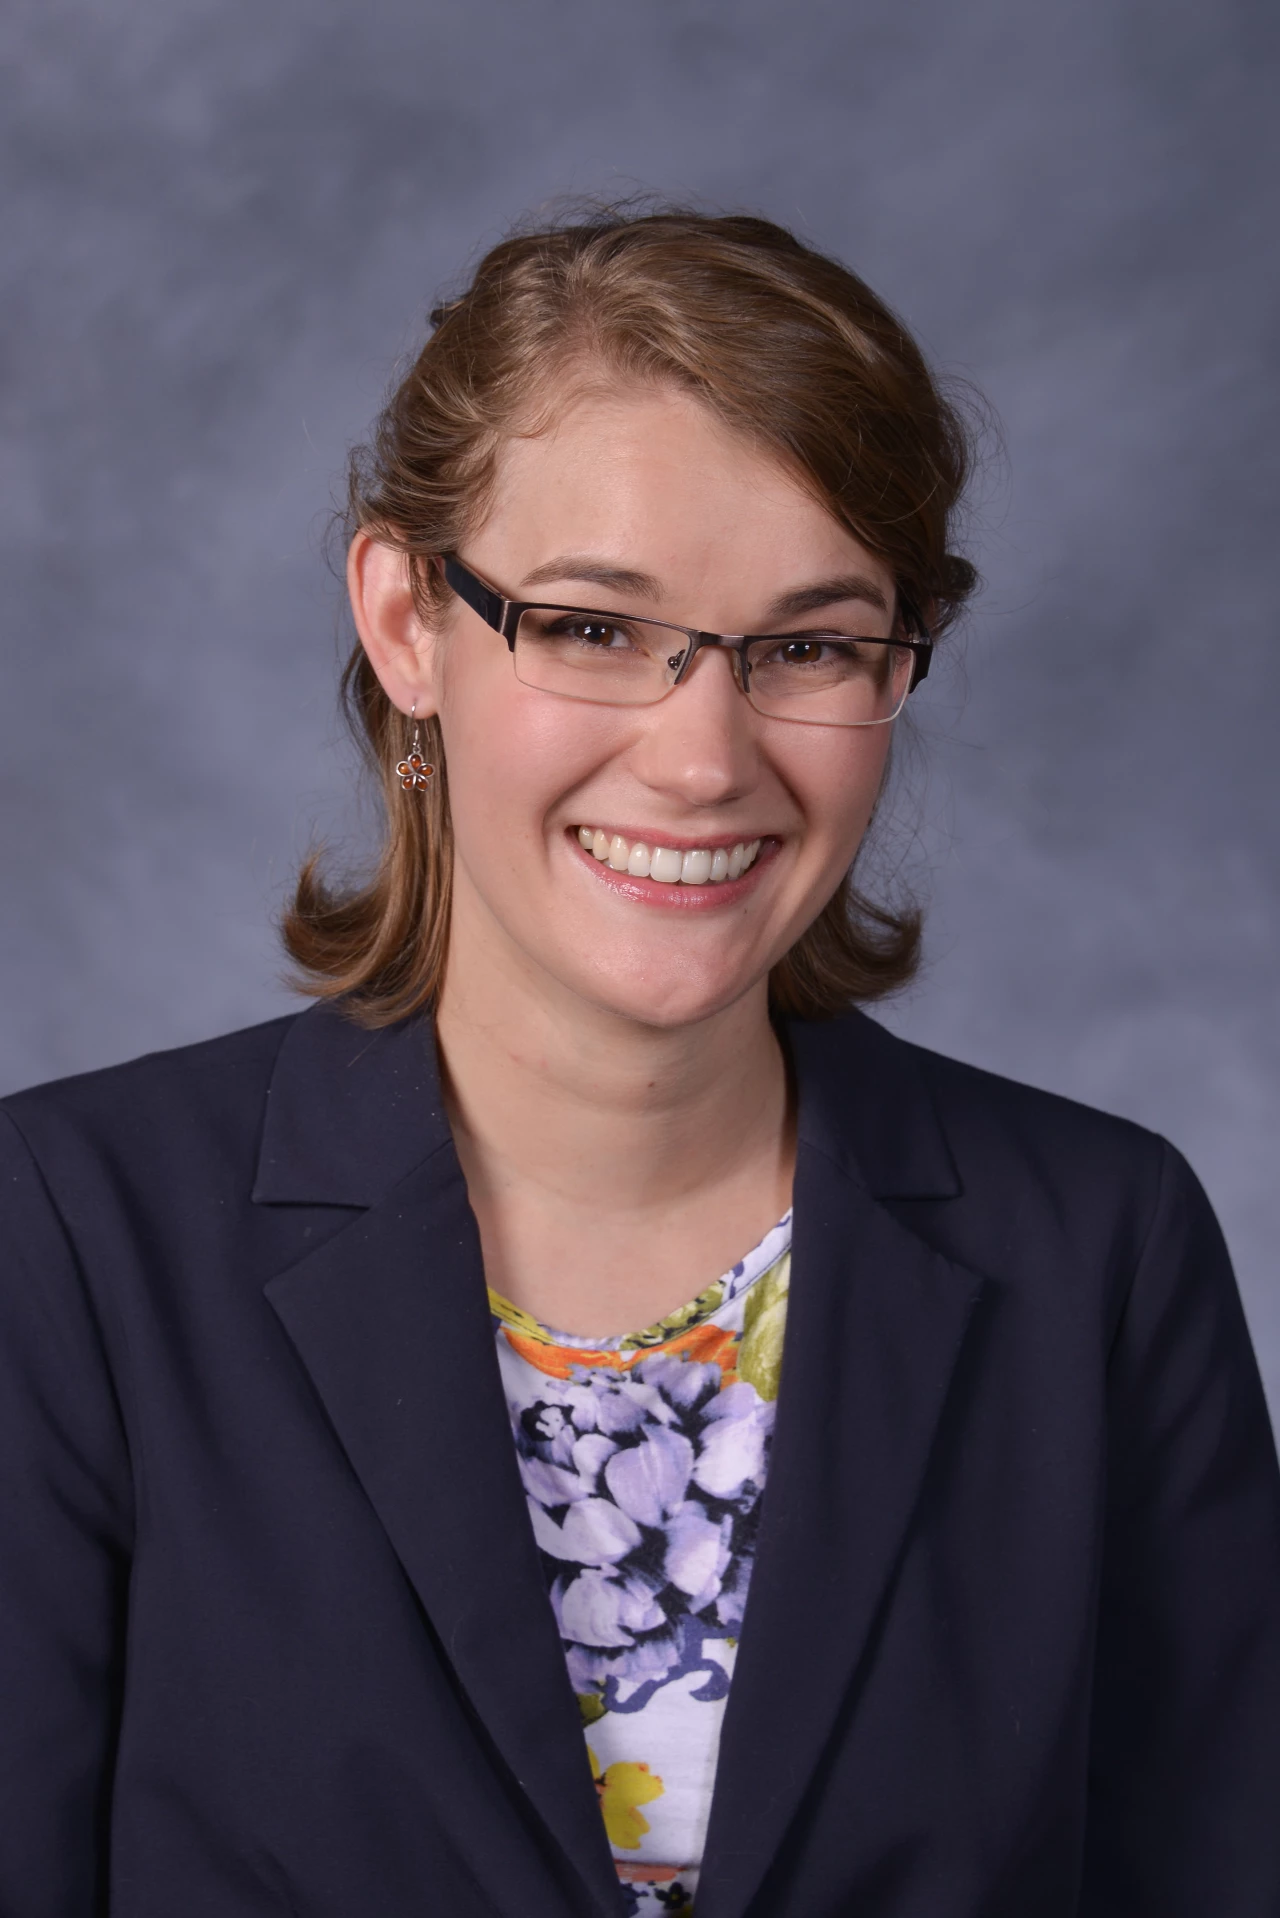 Amy Deehr - Primary Care doctor at Children's Health Center